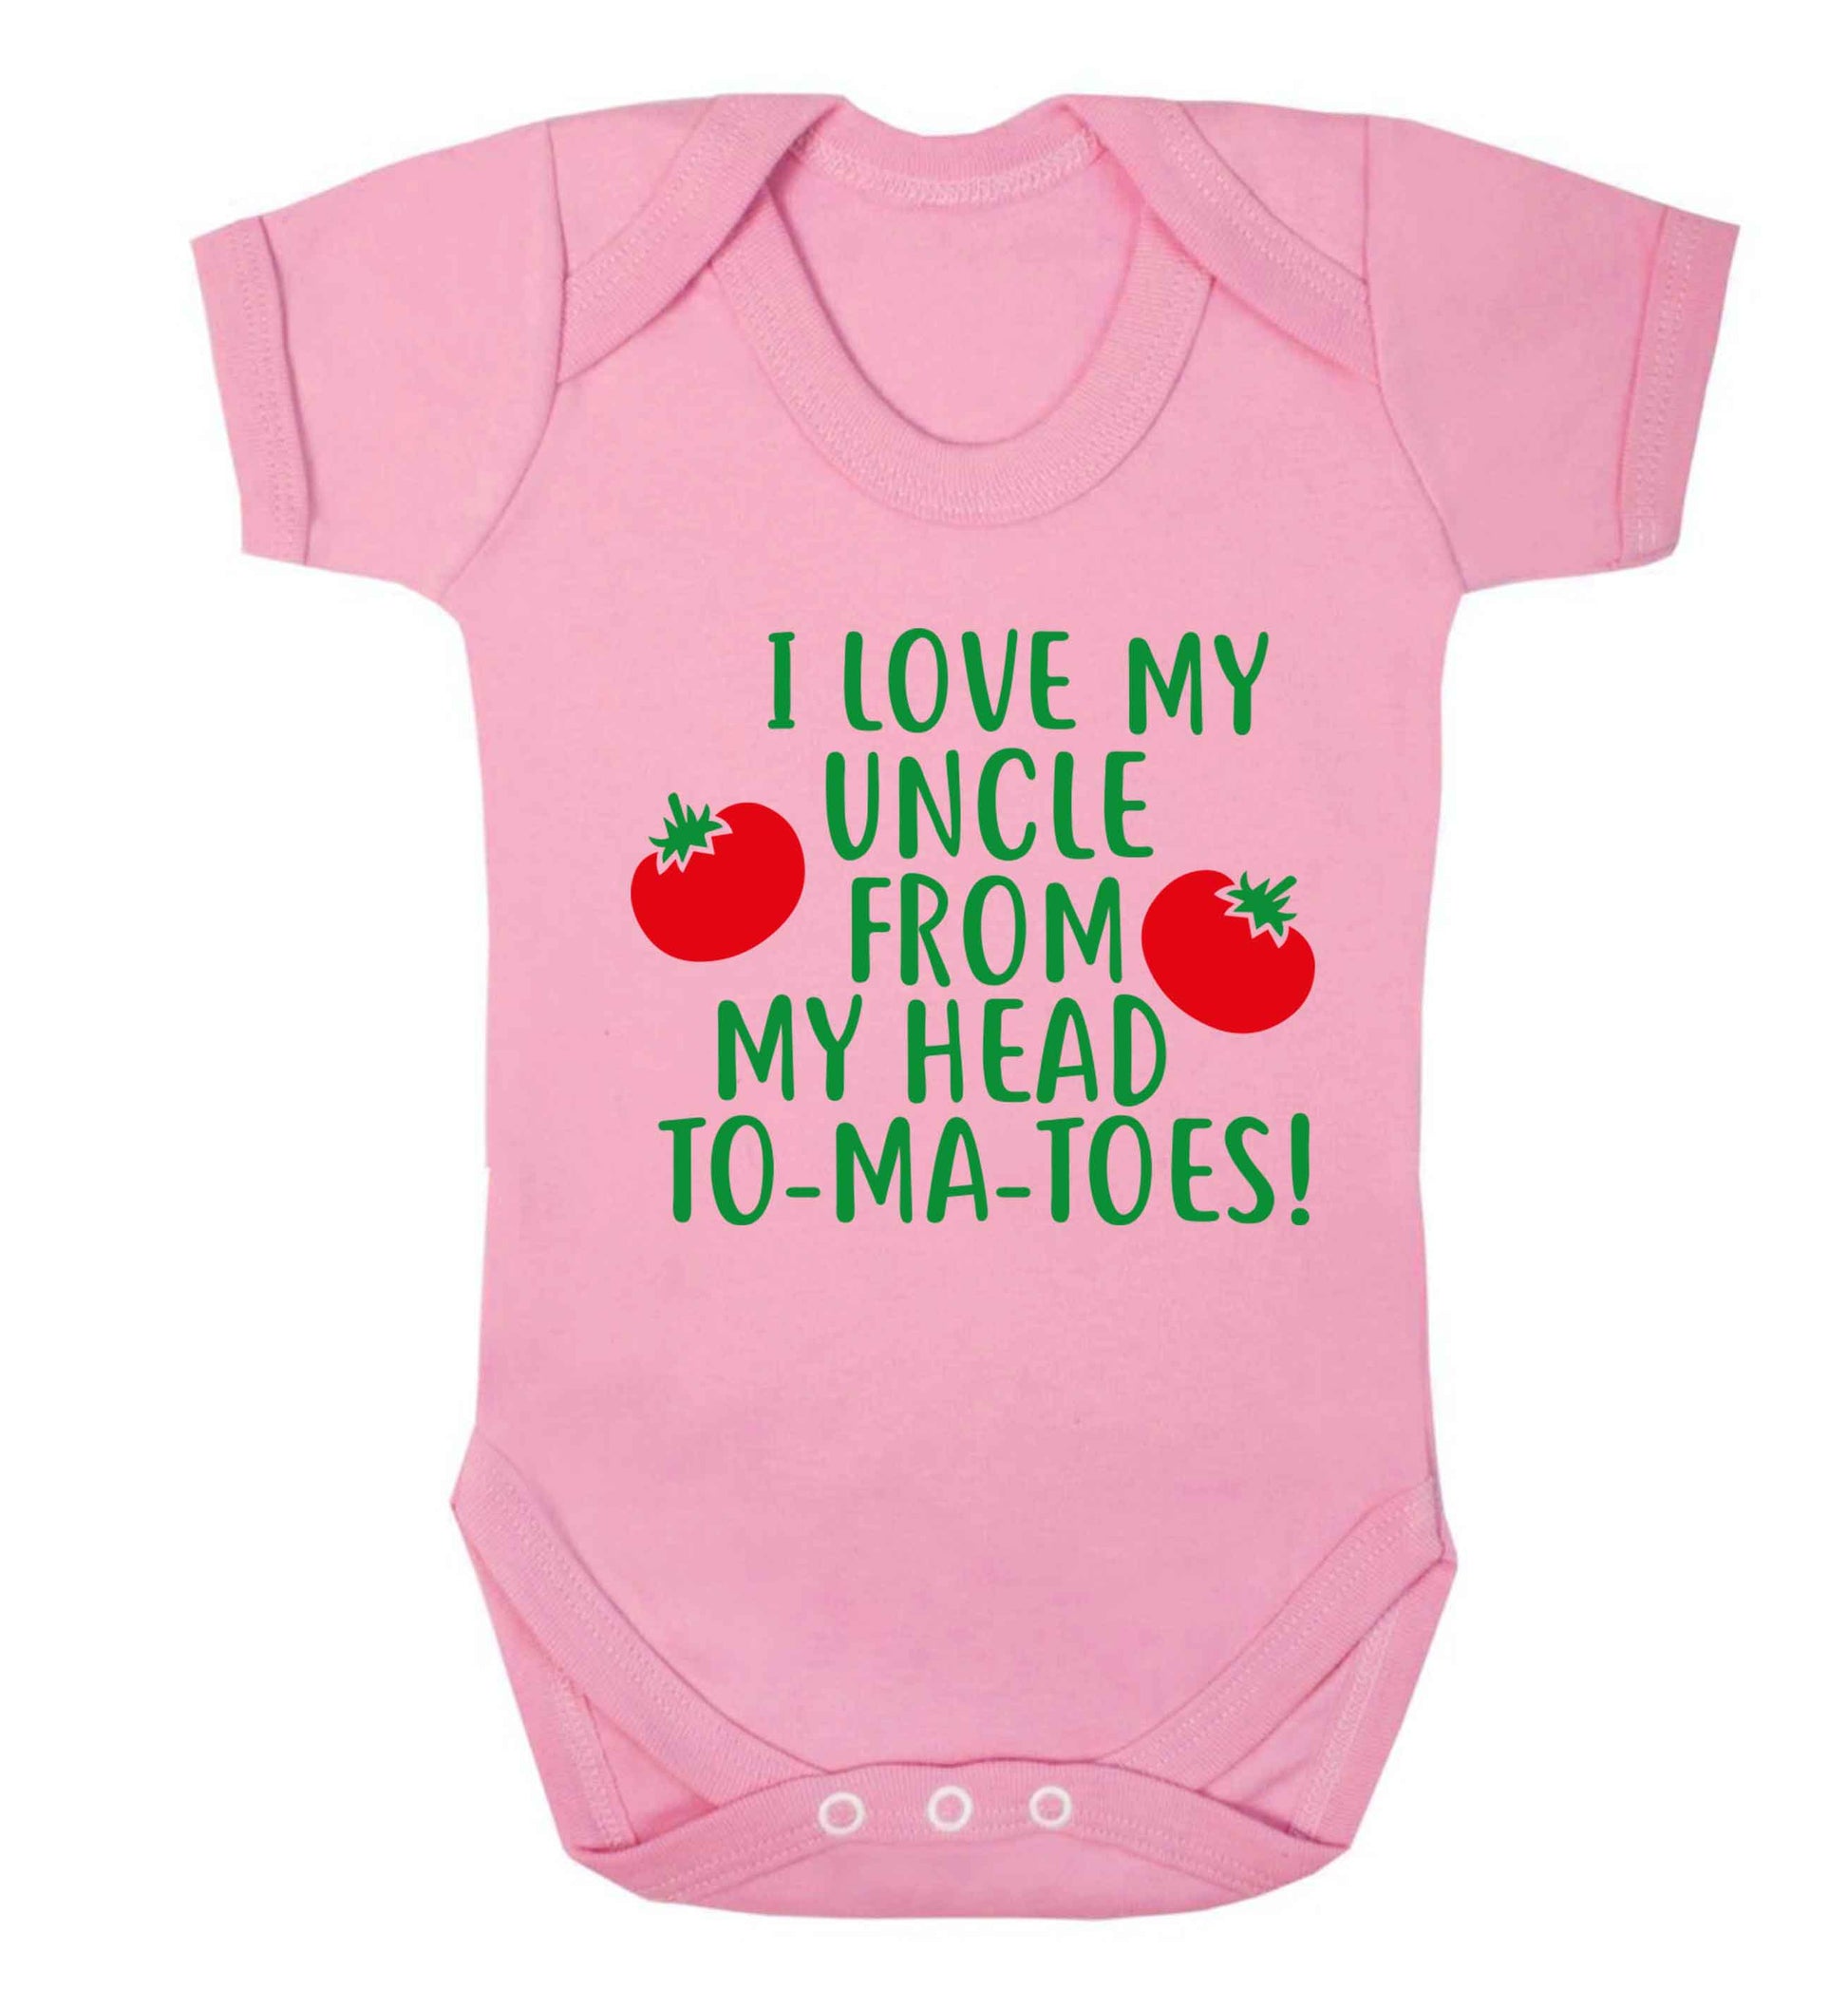 I love my uncle from my head To-Ma-Toes Baby Vest pale pink 18-24 months